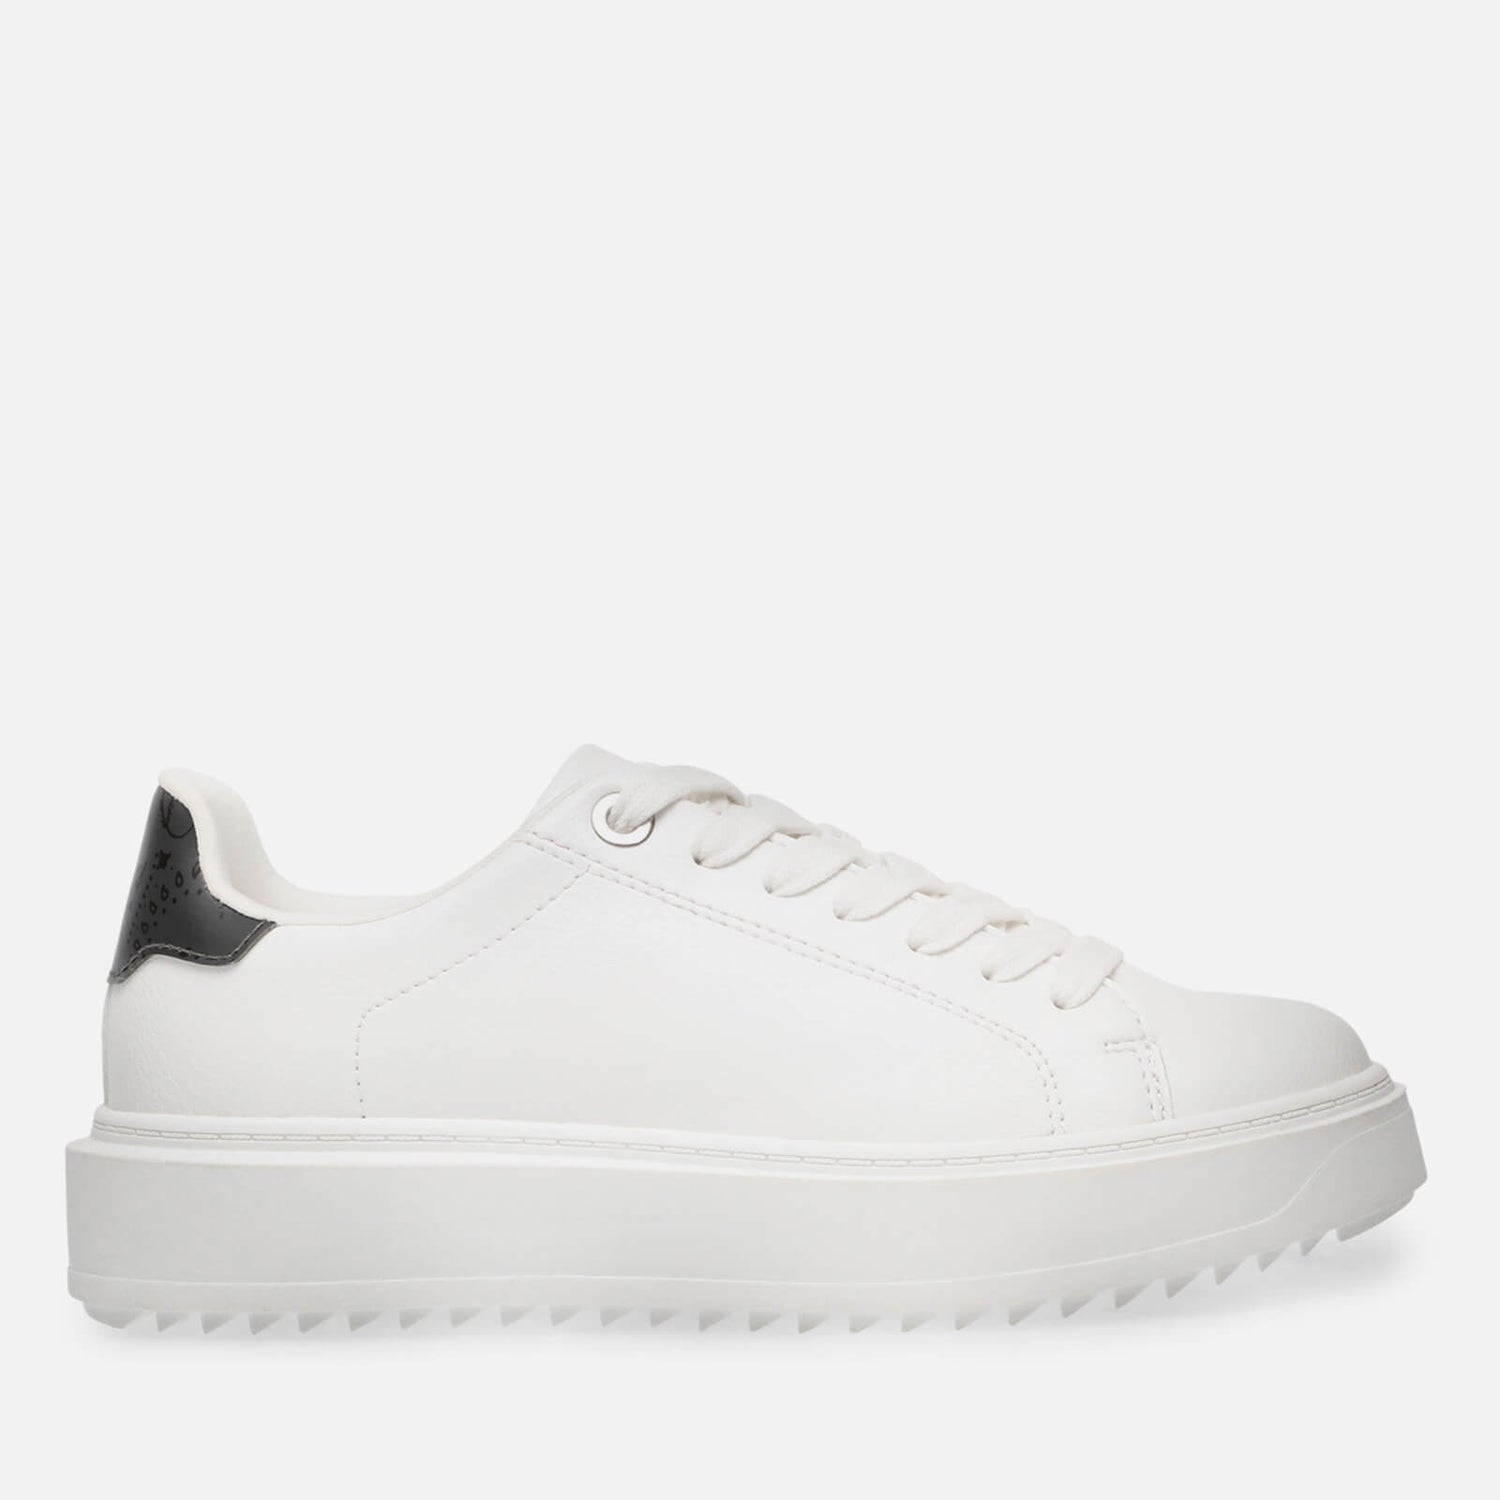 Steve Madden Catcher Faux Leather Trainers - UK 3